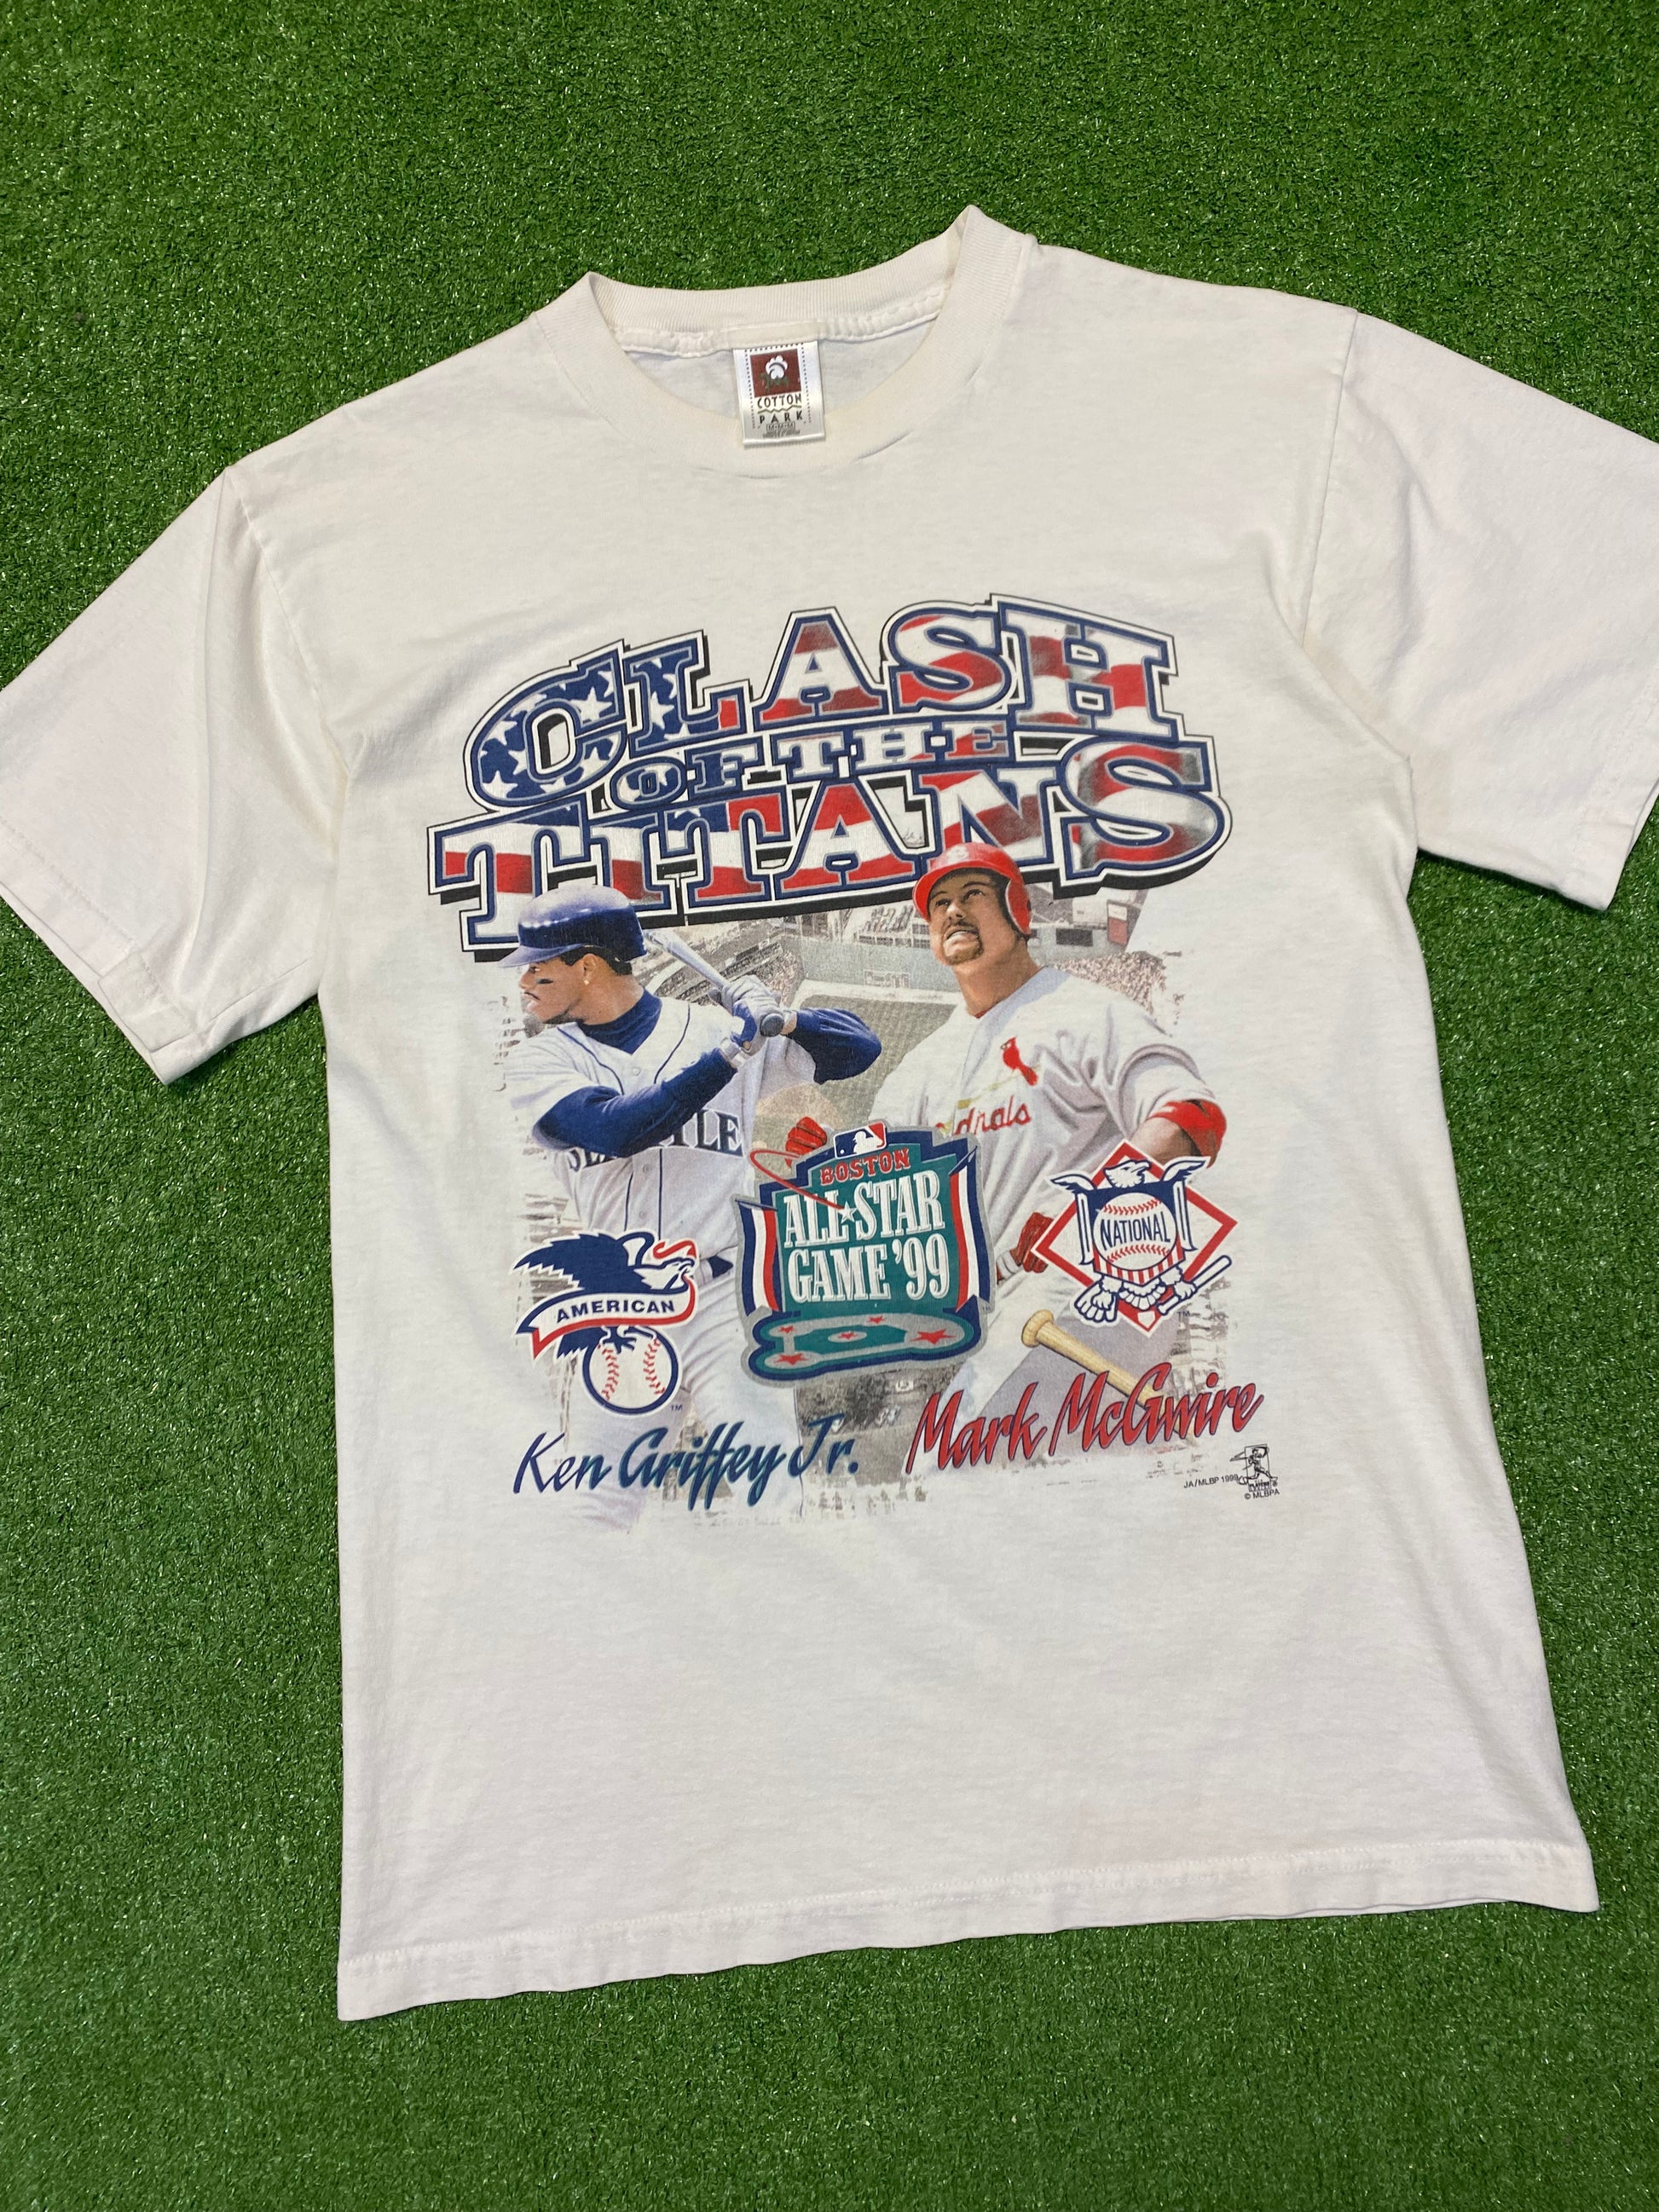 1999 Yankees vs Red Sox American League Championship Vintage T